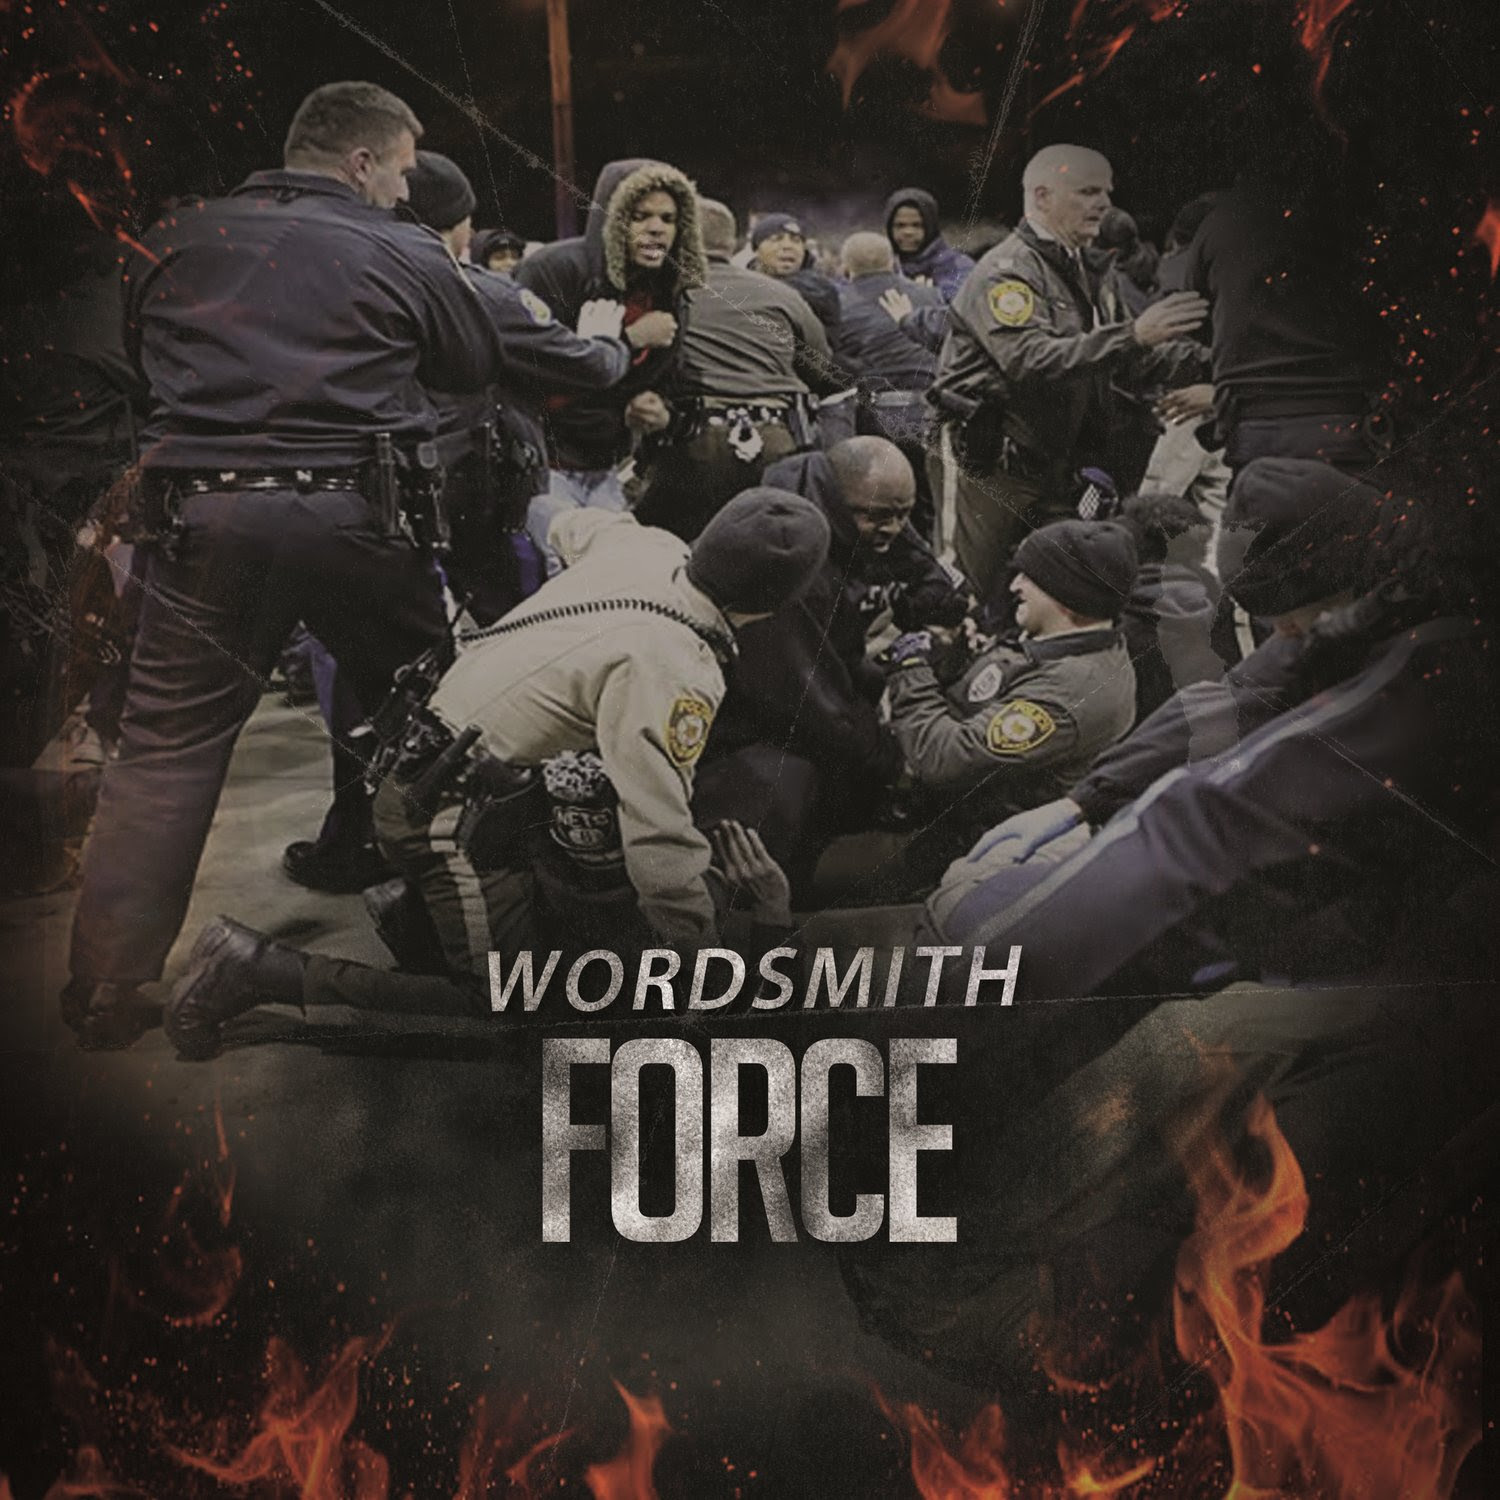 Force by Wordsmith